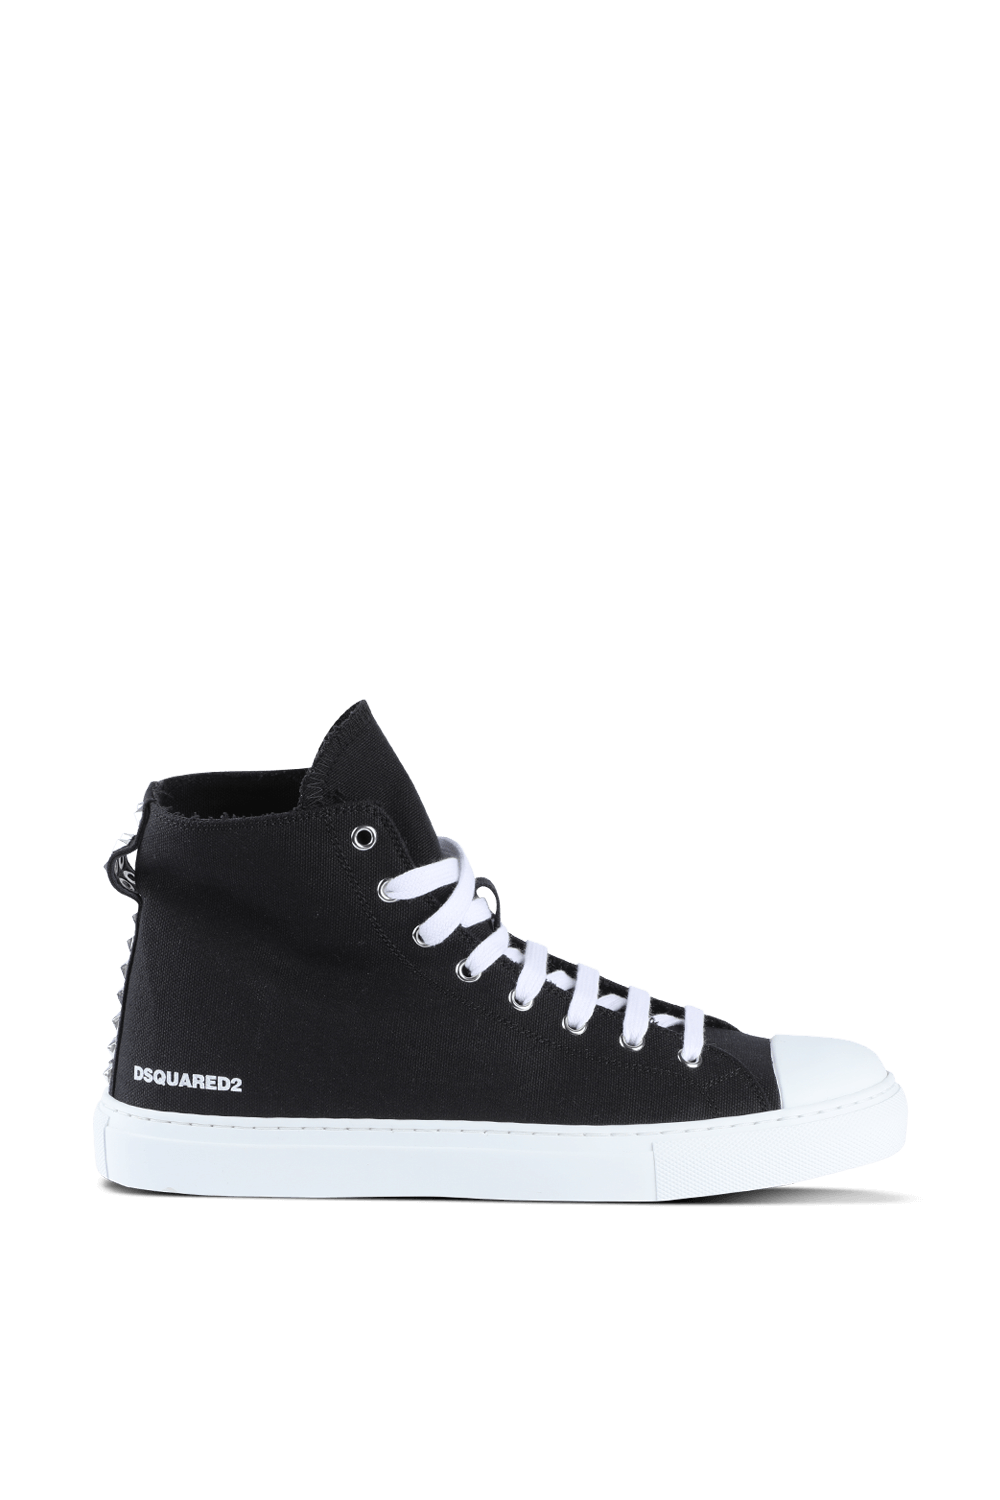 High Sneakers in Black DSQUARED2